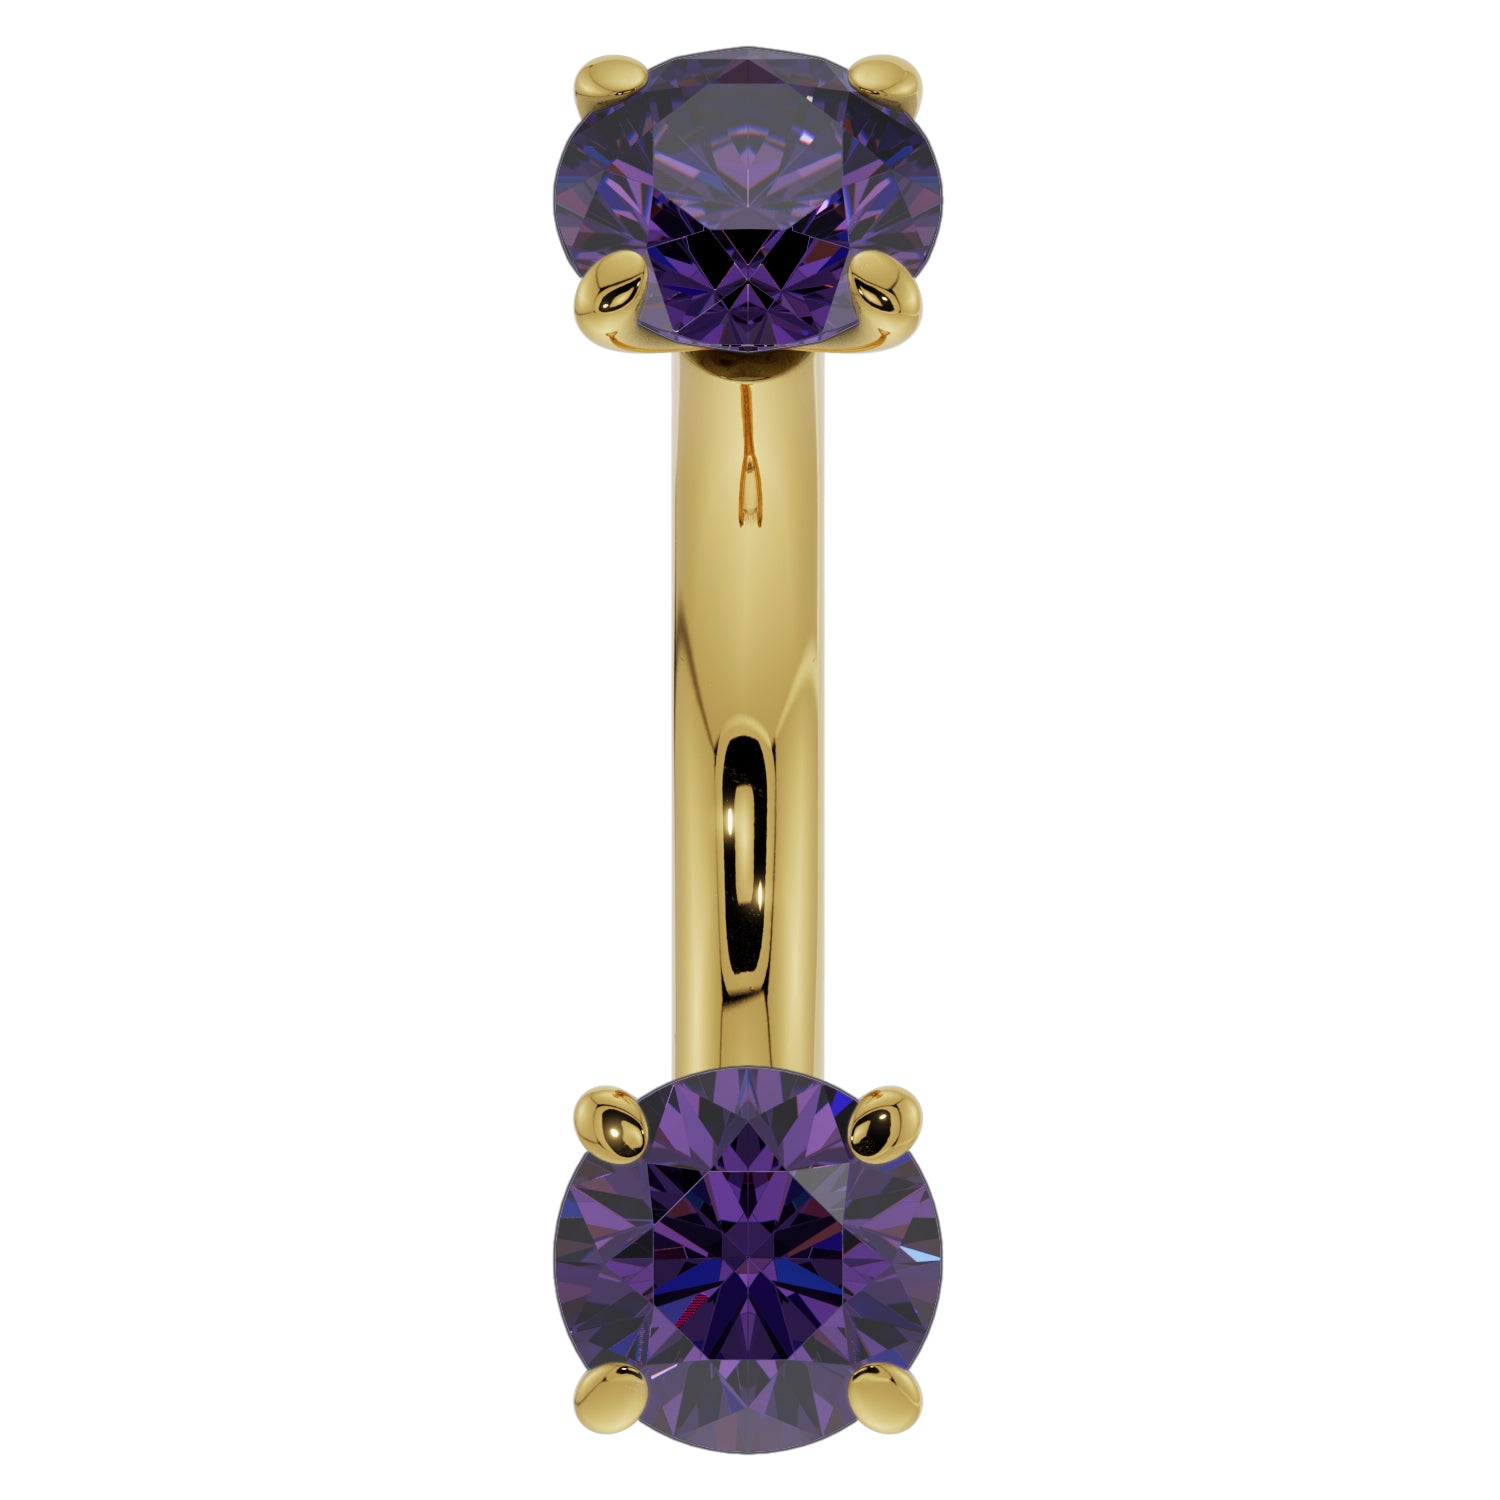 Amethyst Prong-Set Eyebrow Rook Belly Curved Barbell-14K Yellow Gold   14G (1.6mm) (Belly Ring)   7 16